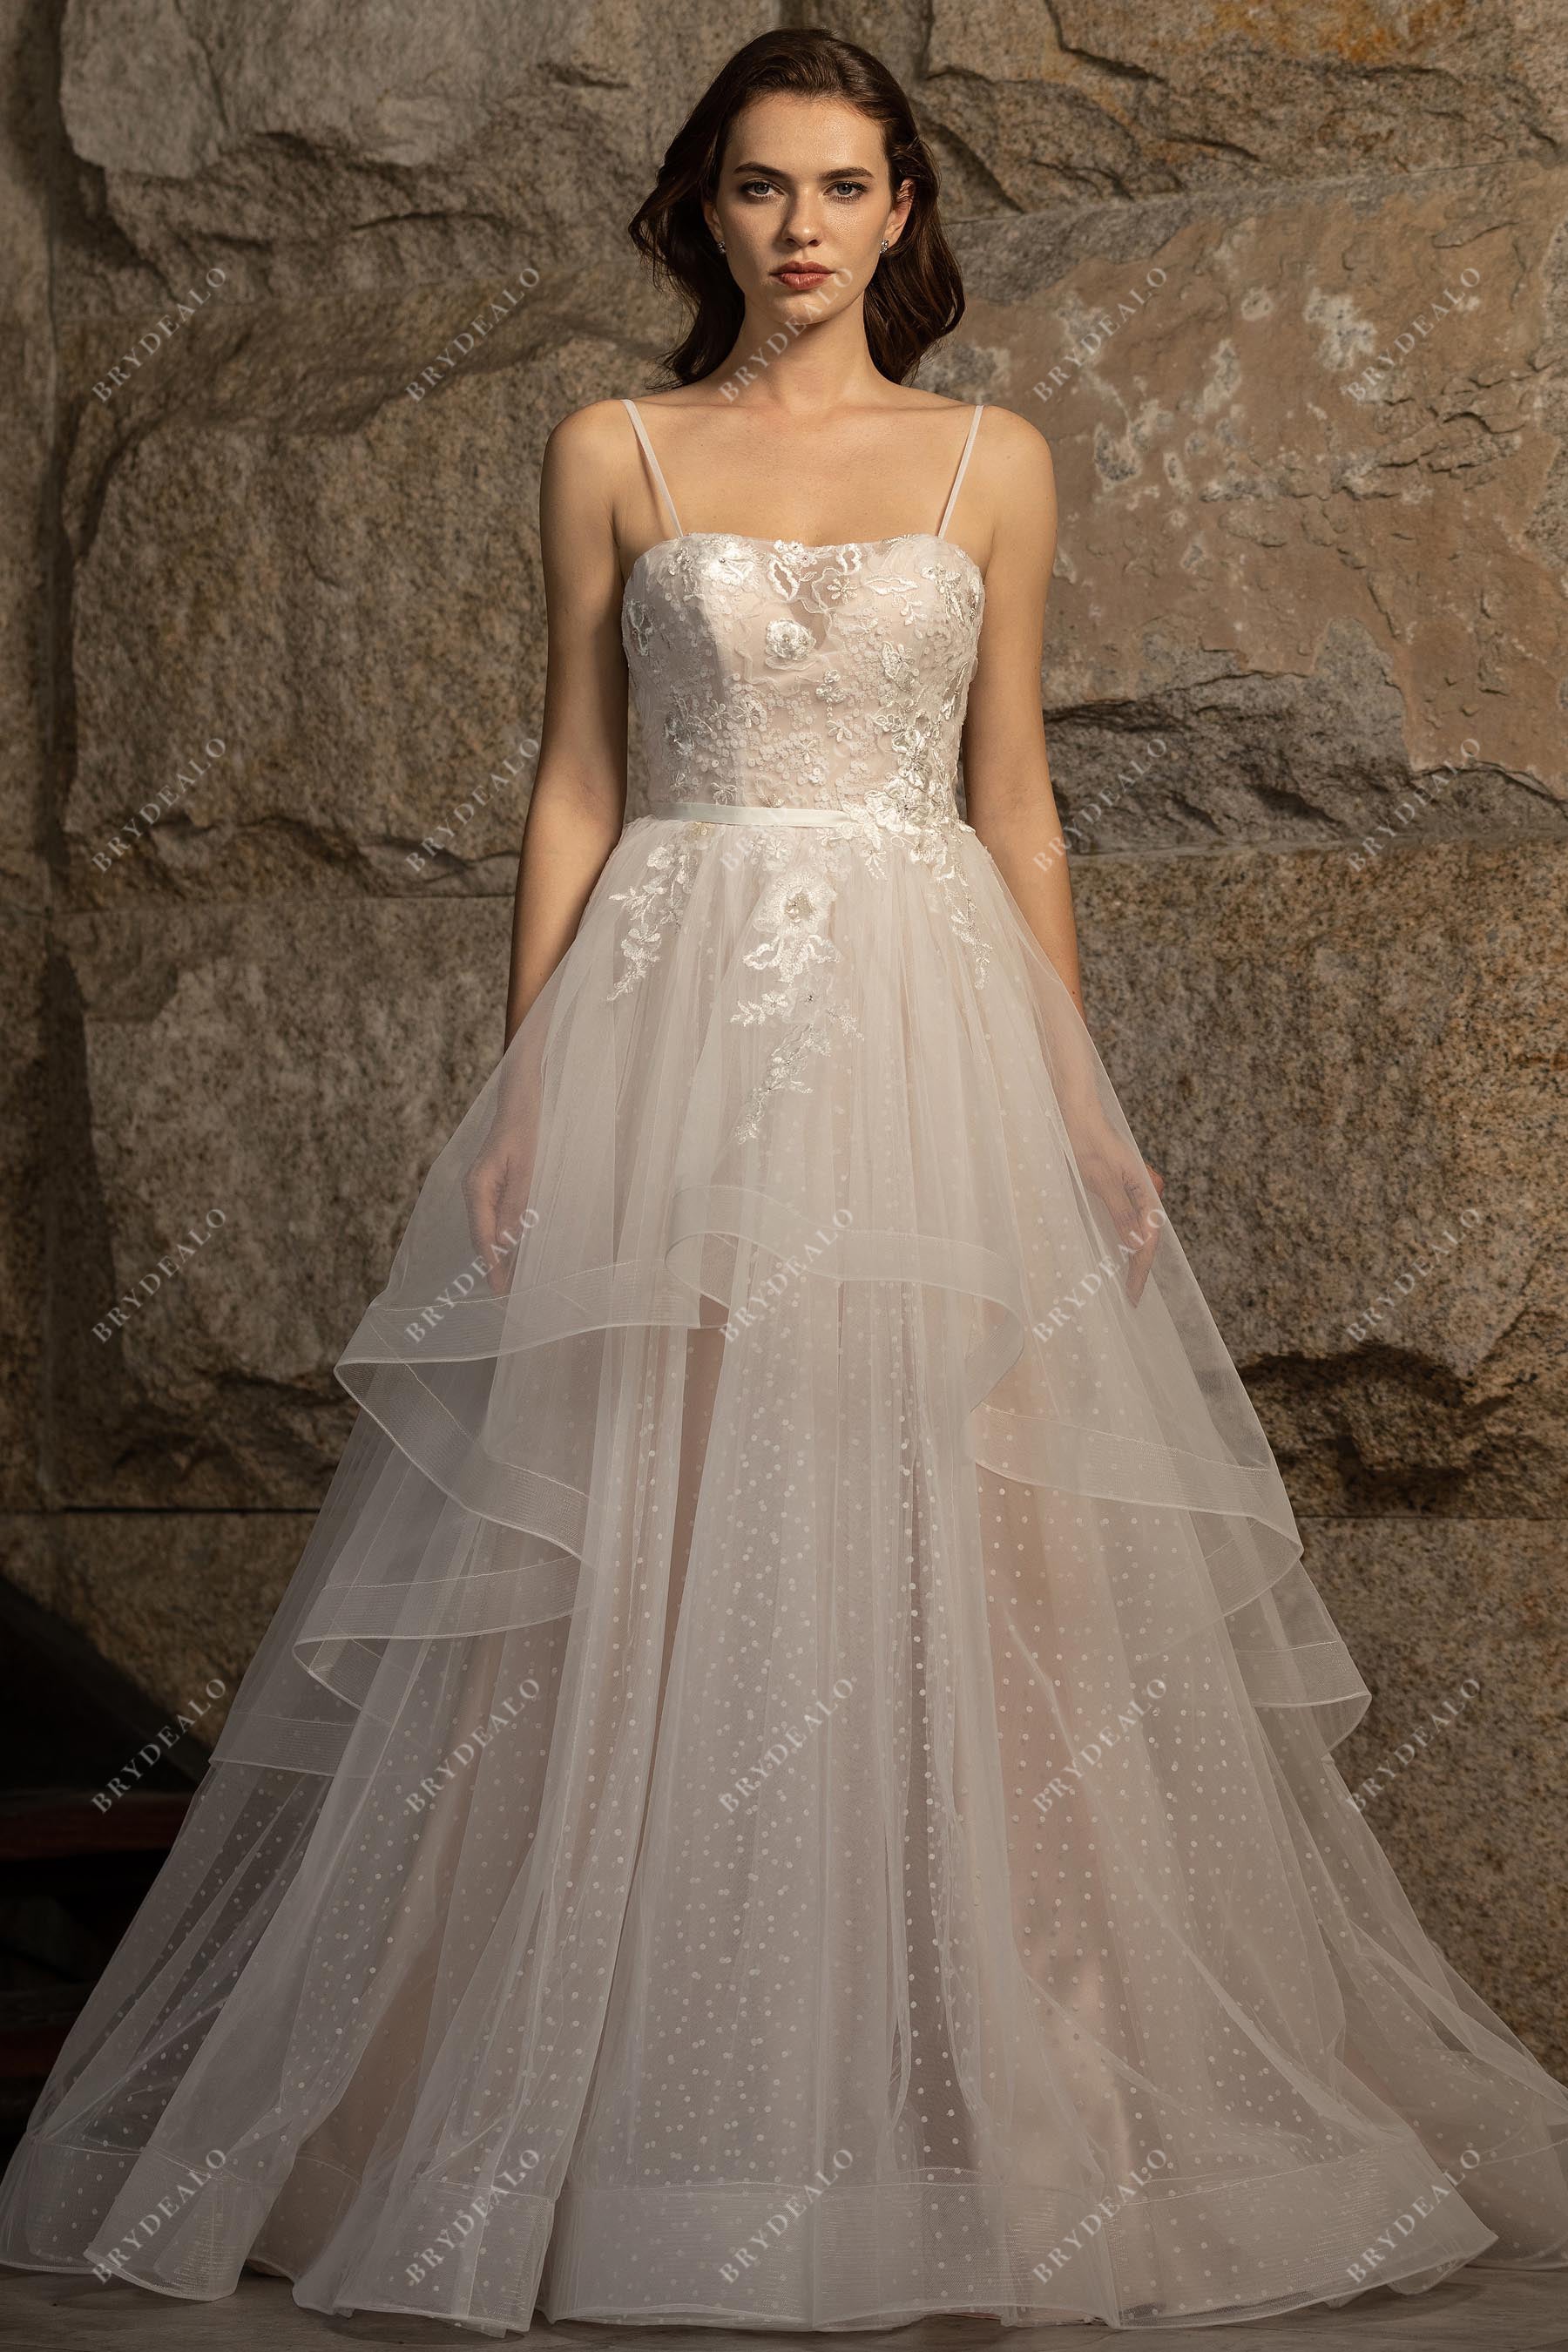 Lace and Tulle Corset Wedding Dress - Style #P5086